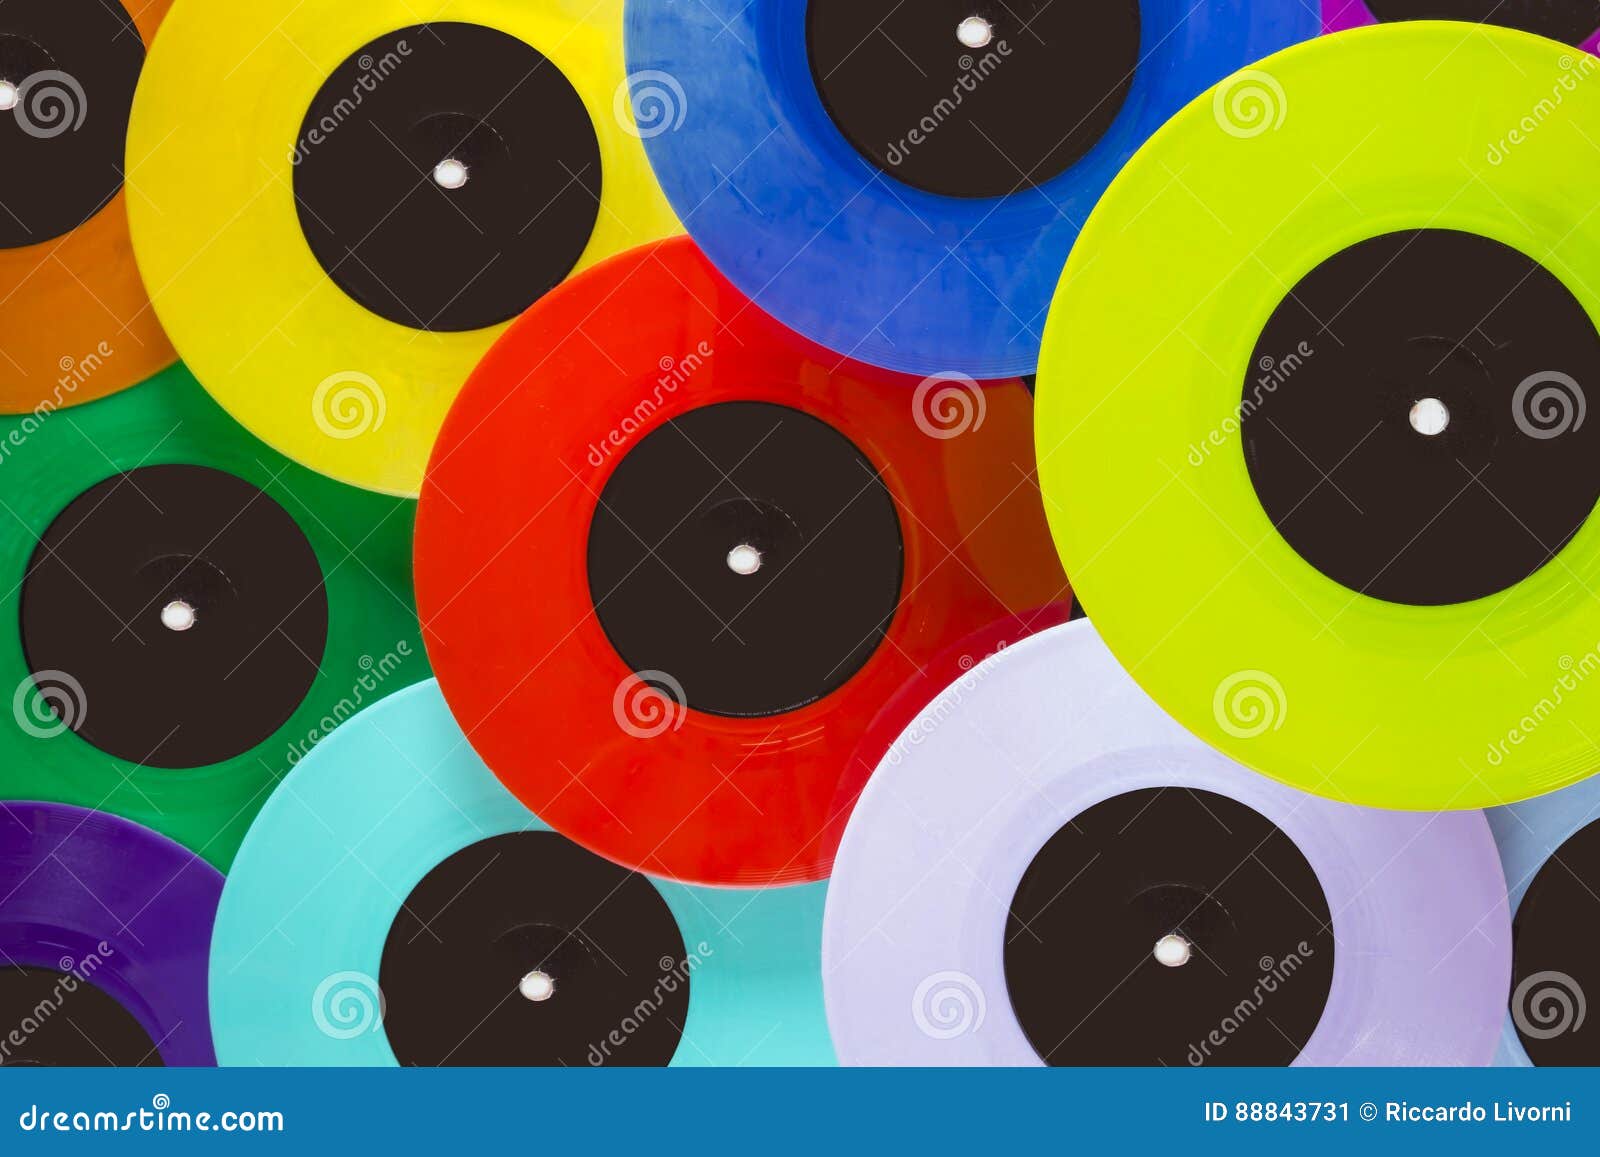 top view of colorful vinyl records